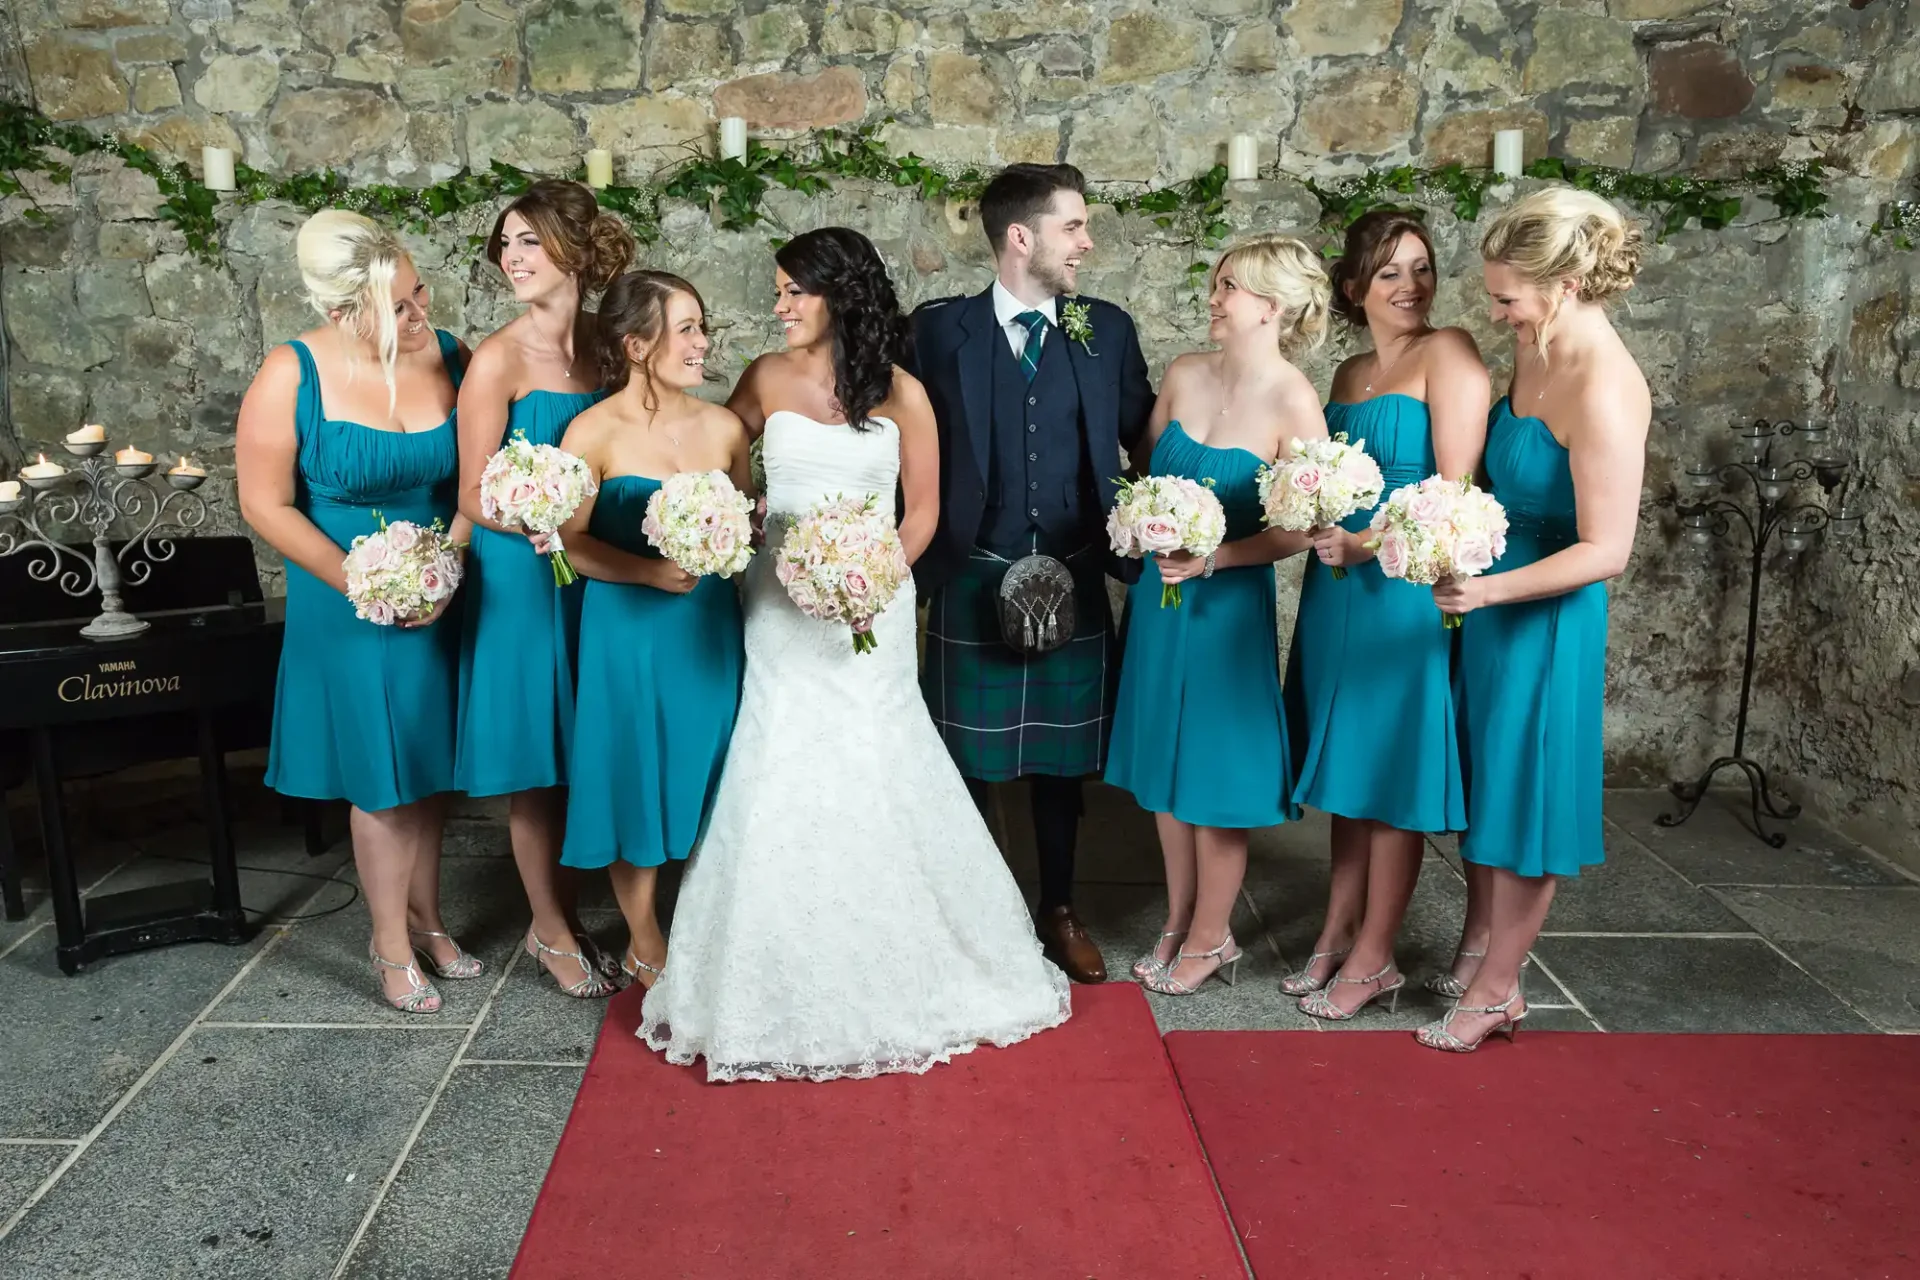 A bride and groom posing with bridesmaids dressed in teal, all holding bouquets, in front of a stone wall.